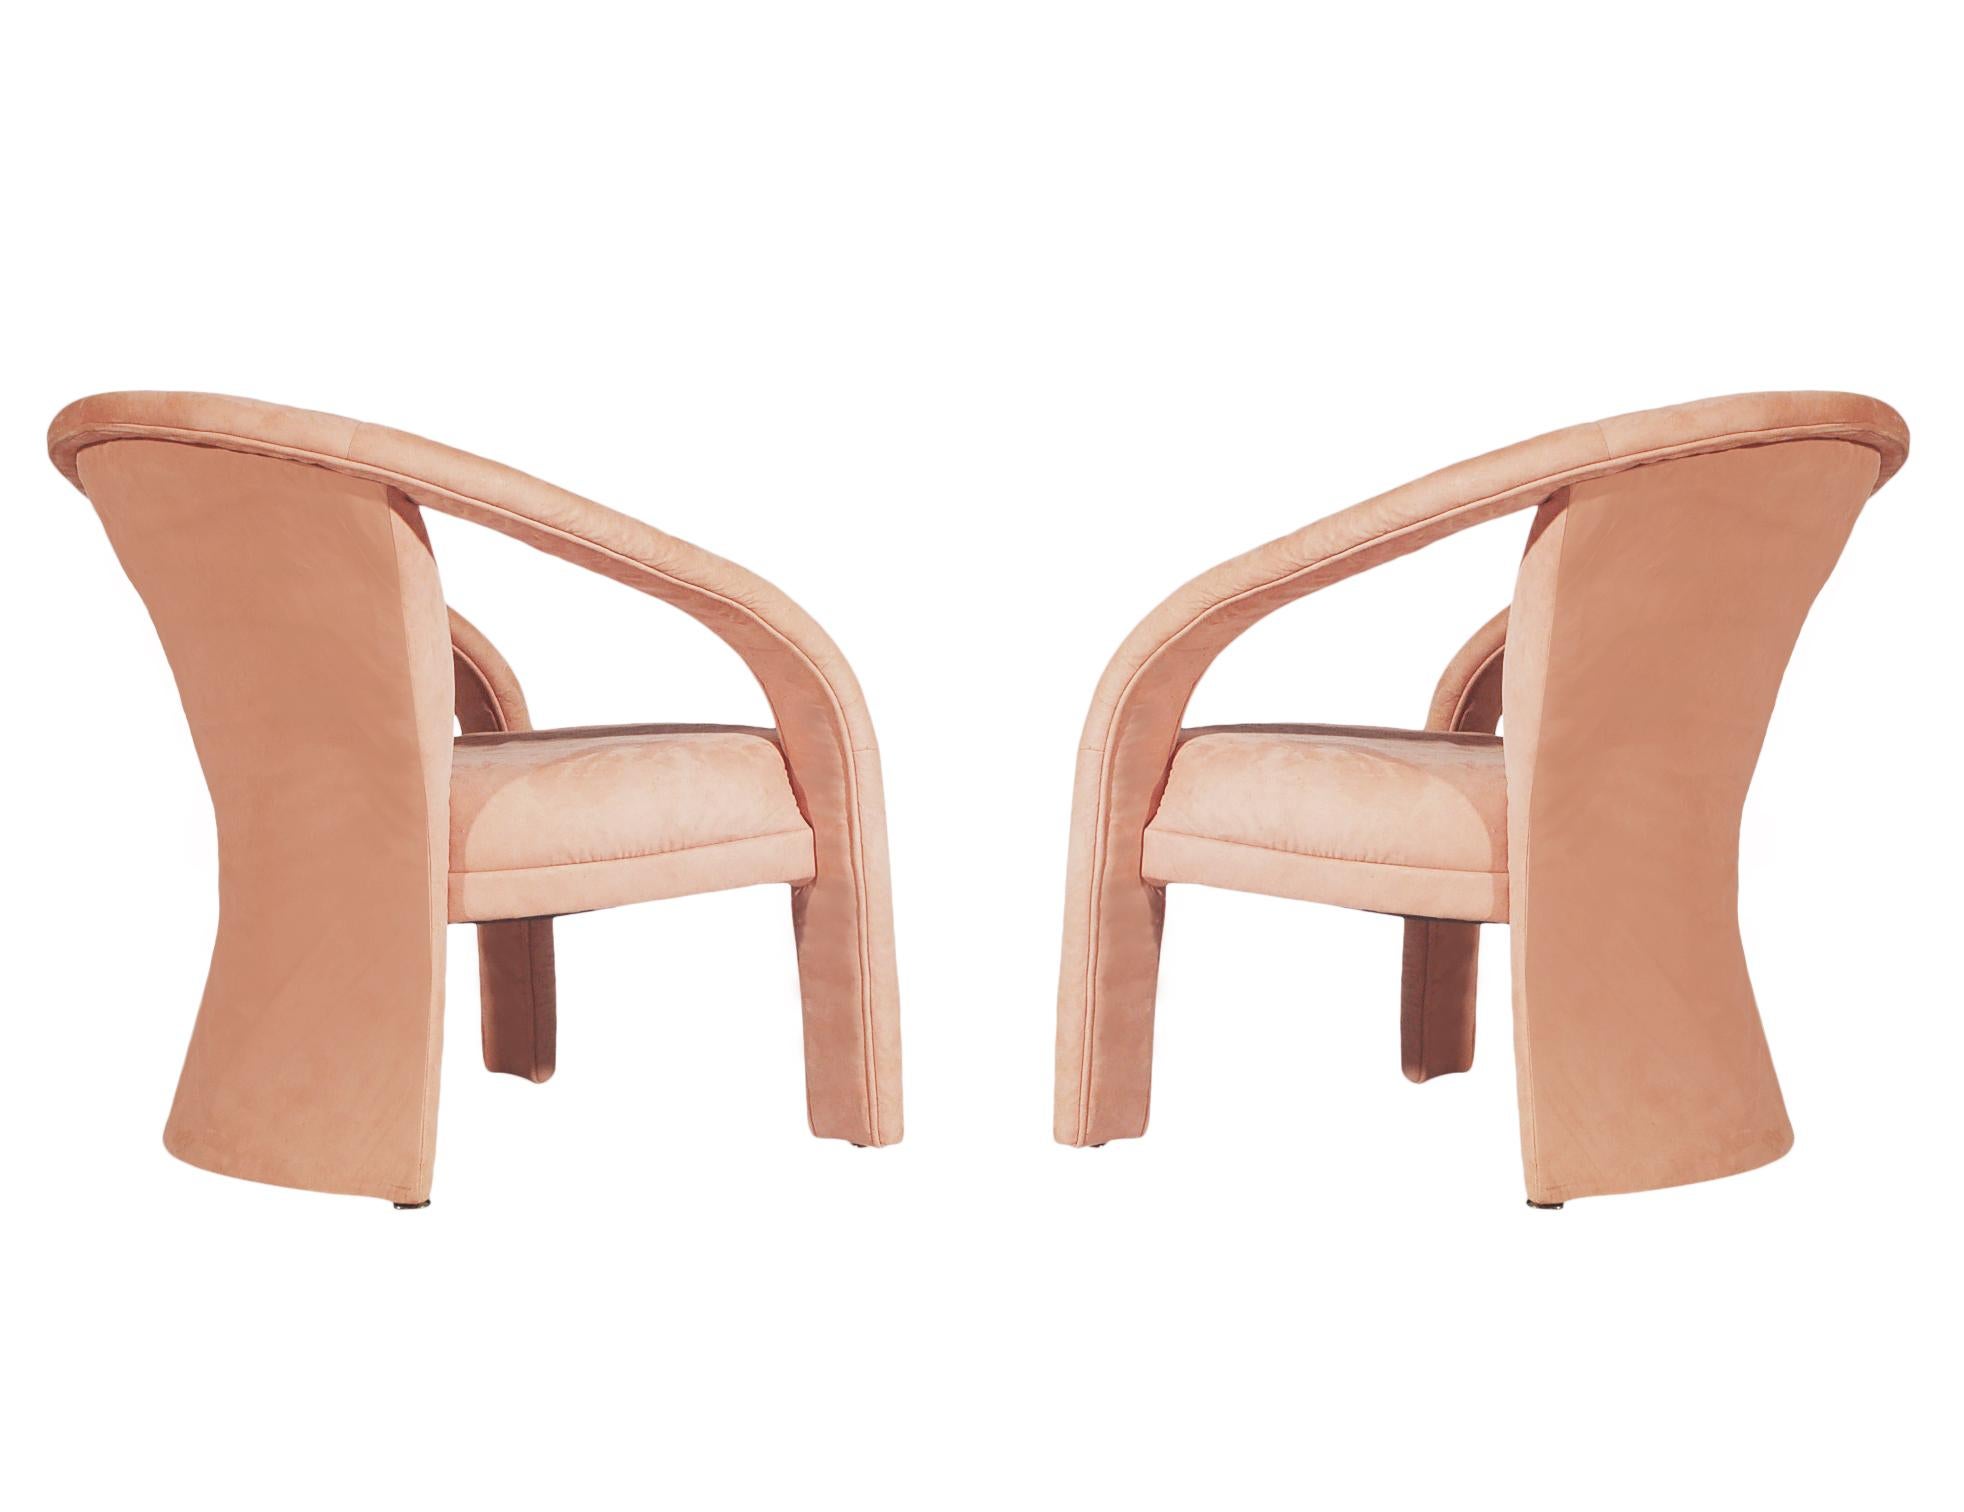 Post-Modern Pair of Decorator Mid Century Post Modern Armchair Lounge Chairs in Blush Pink For Sale